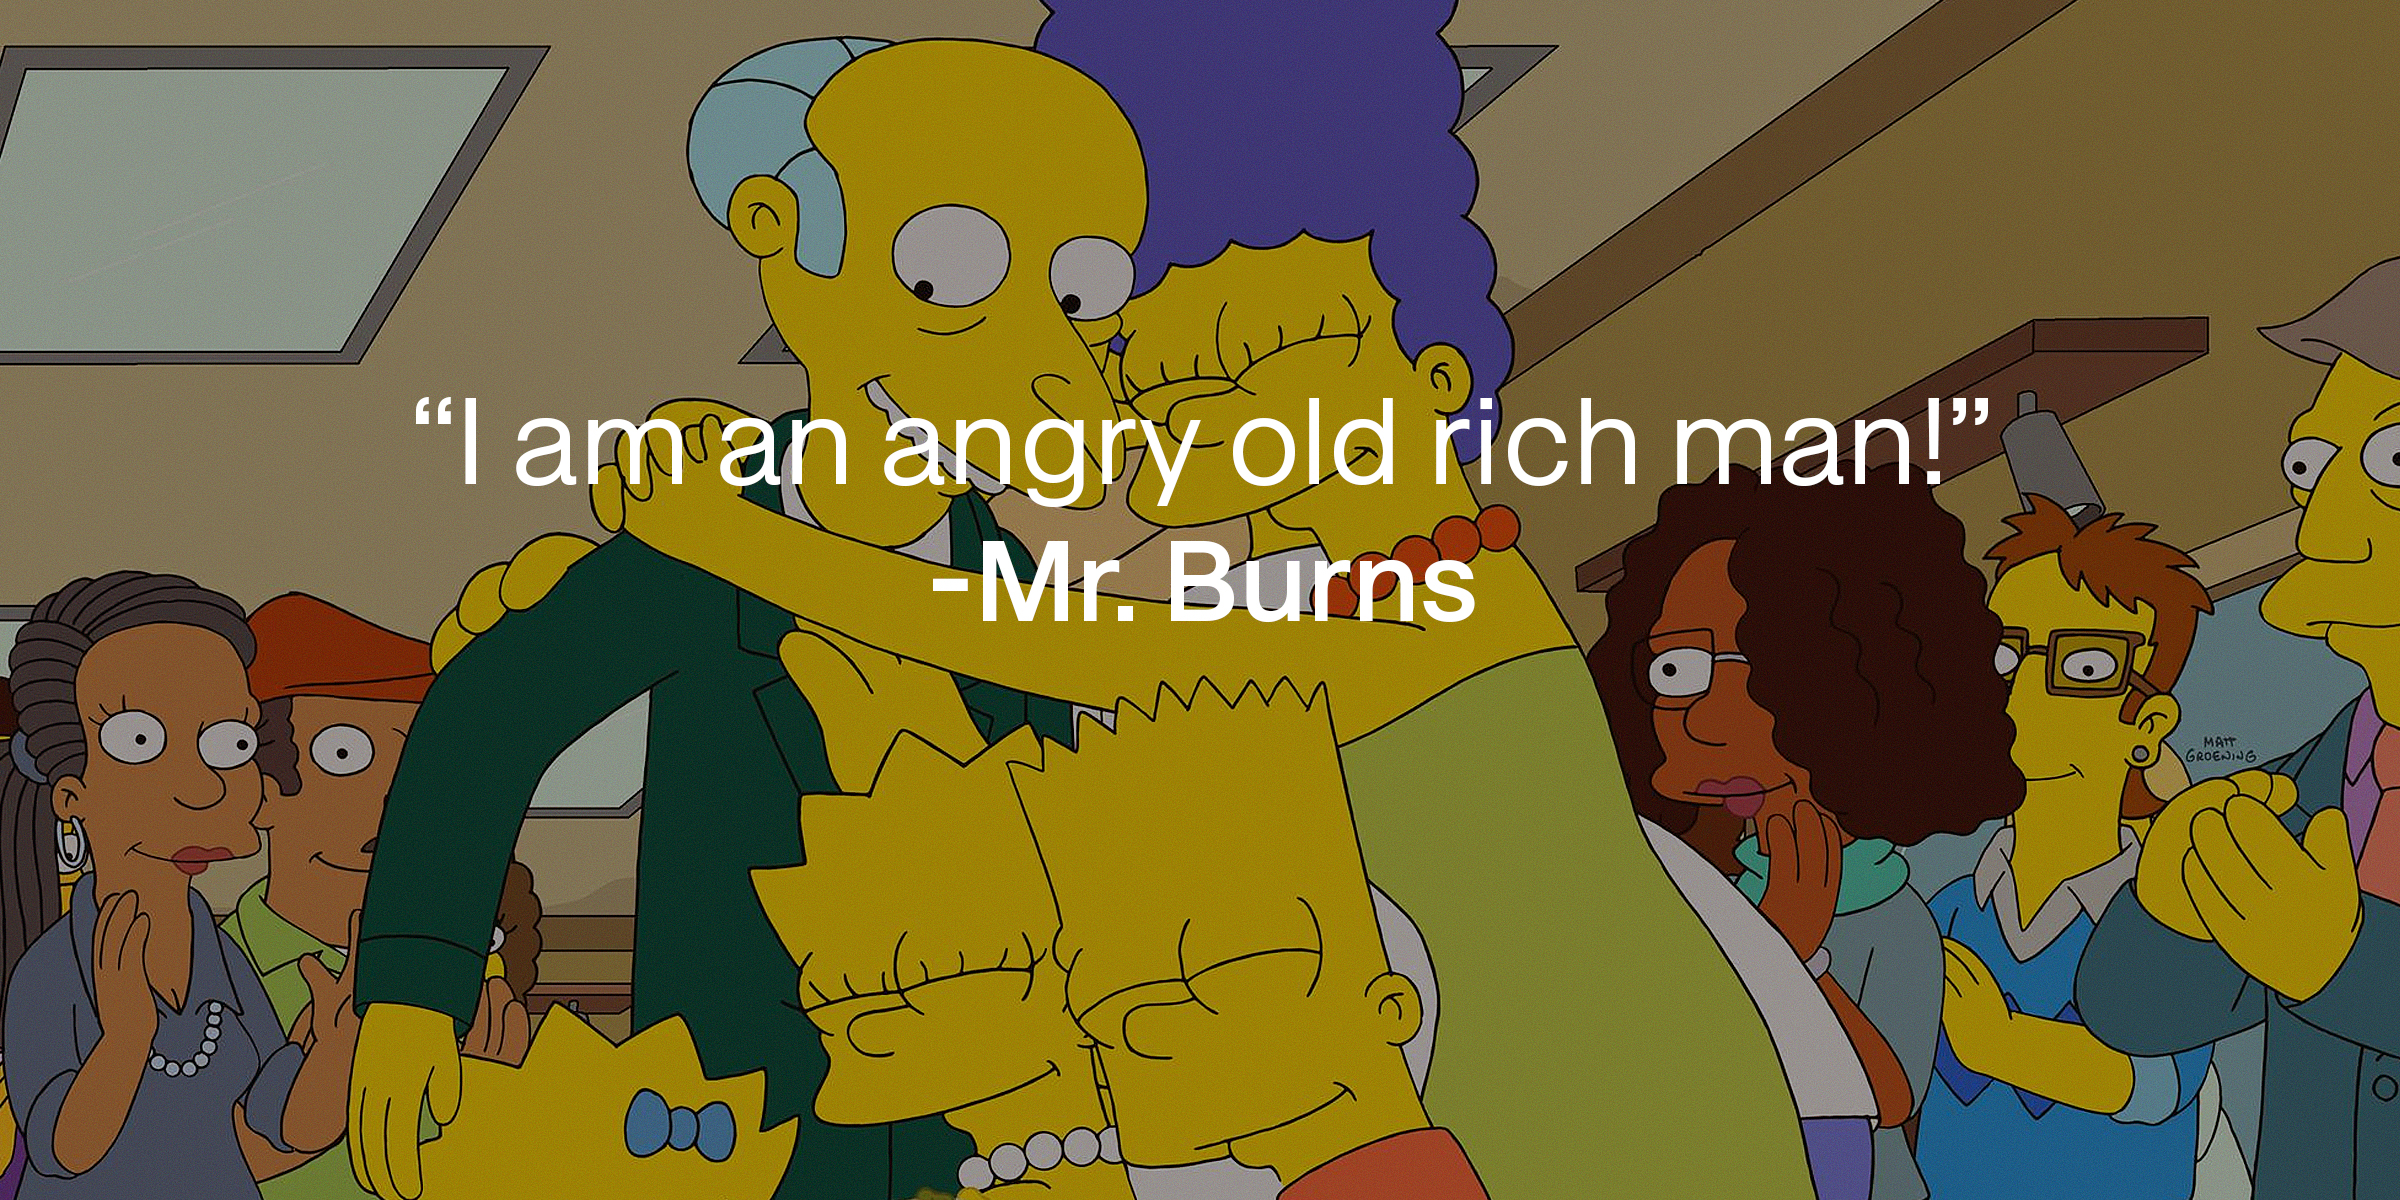 Mr. Burns, with his quote: "I am an angry old rich man!" | Source: facebook.com/TheSimpsons